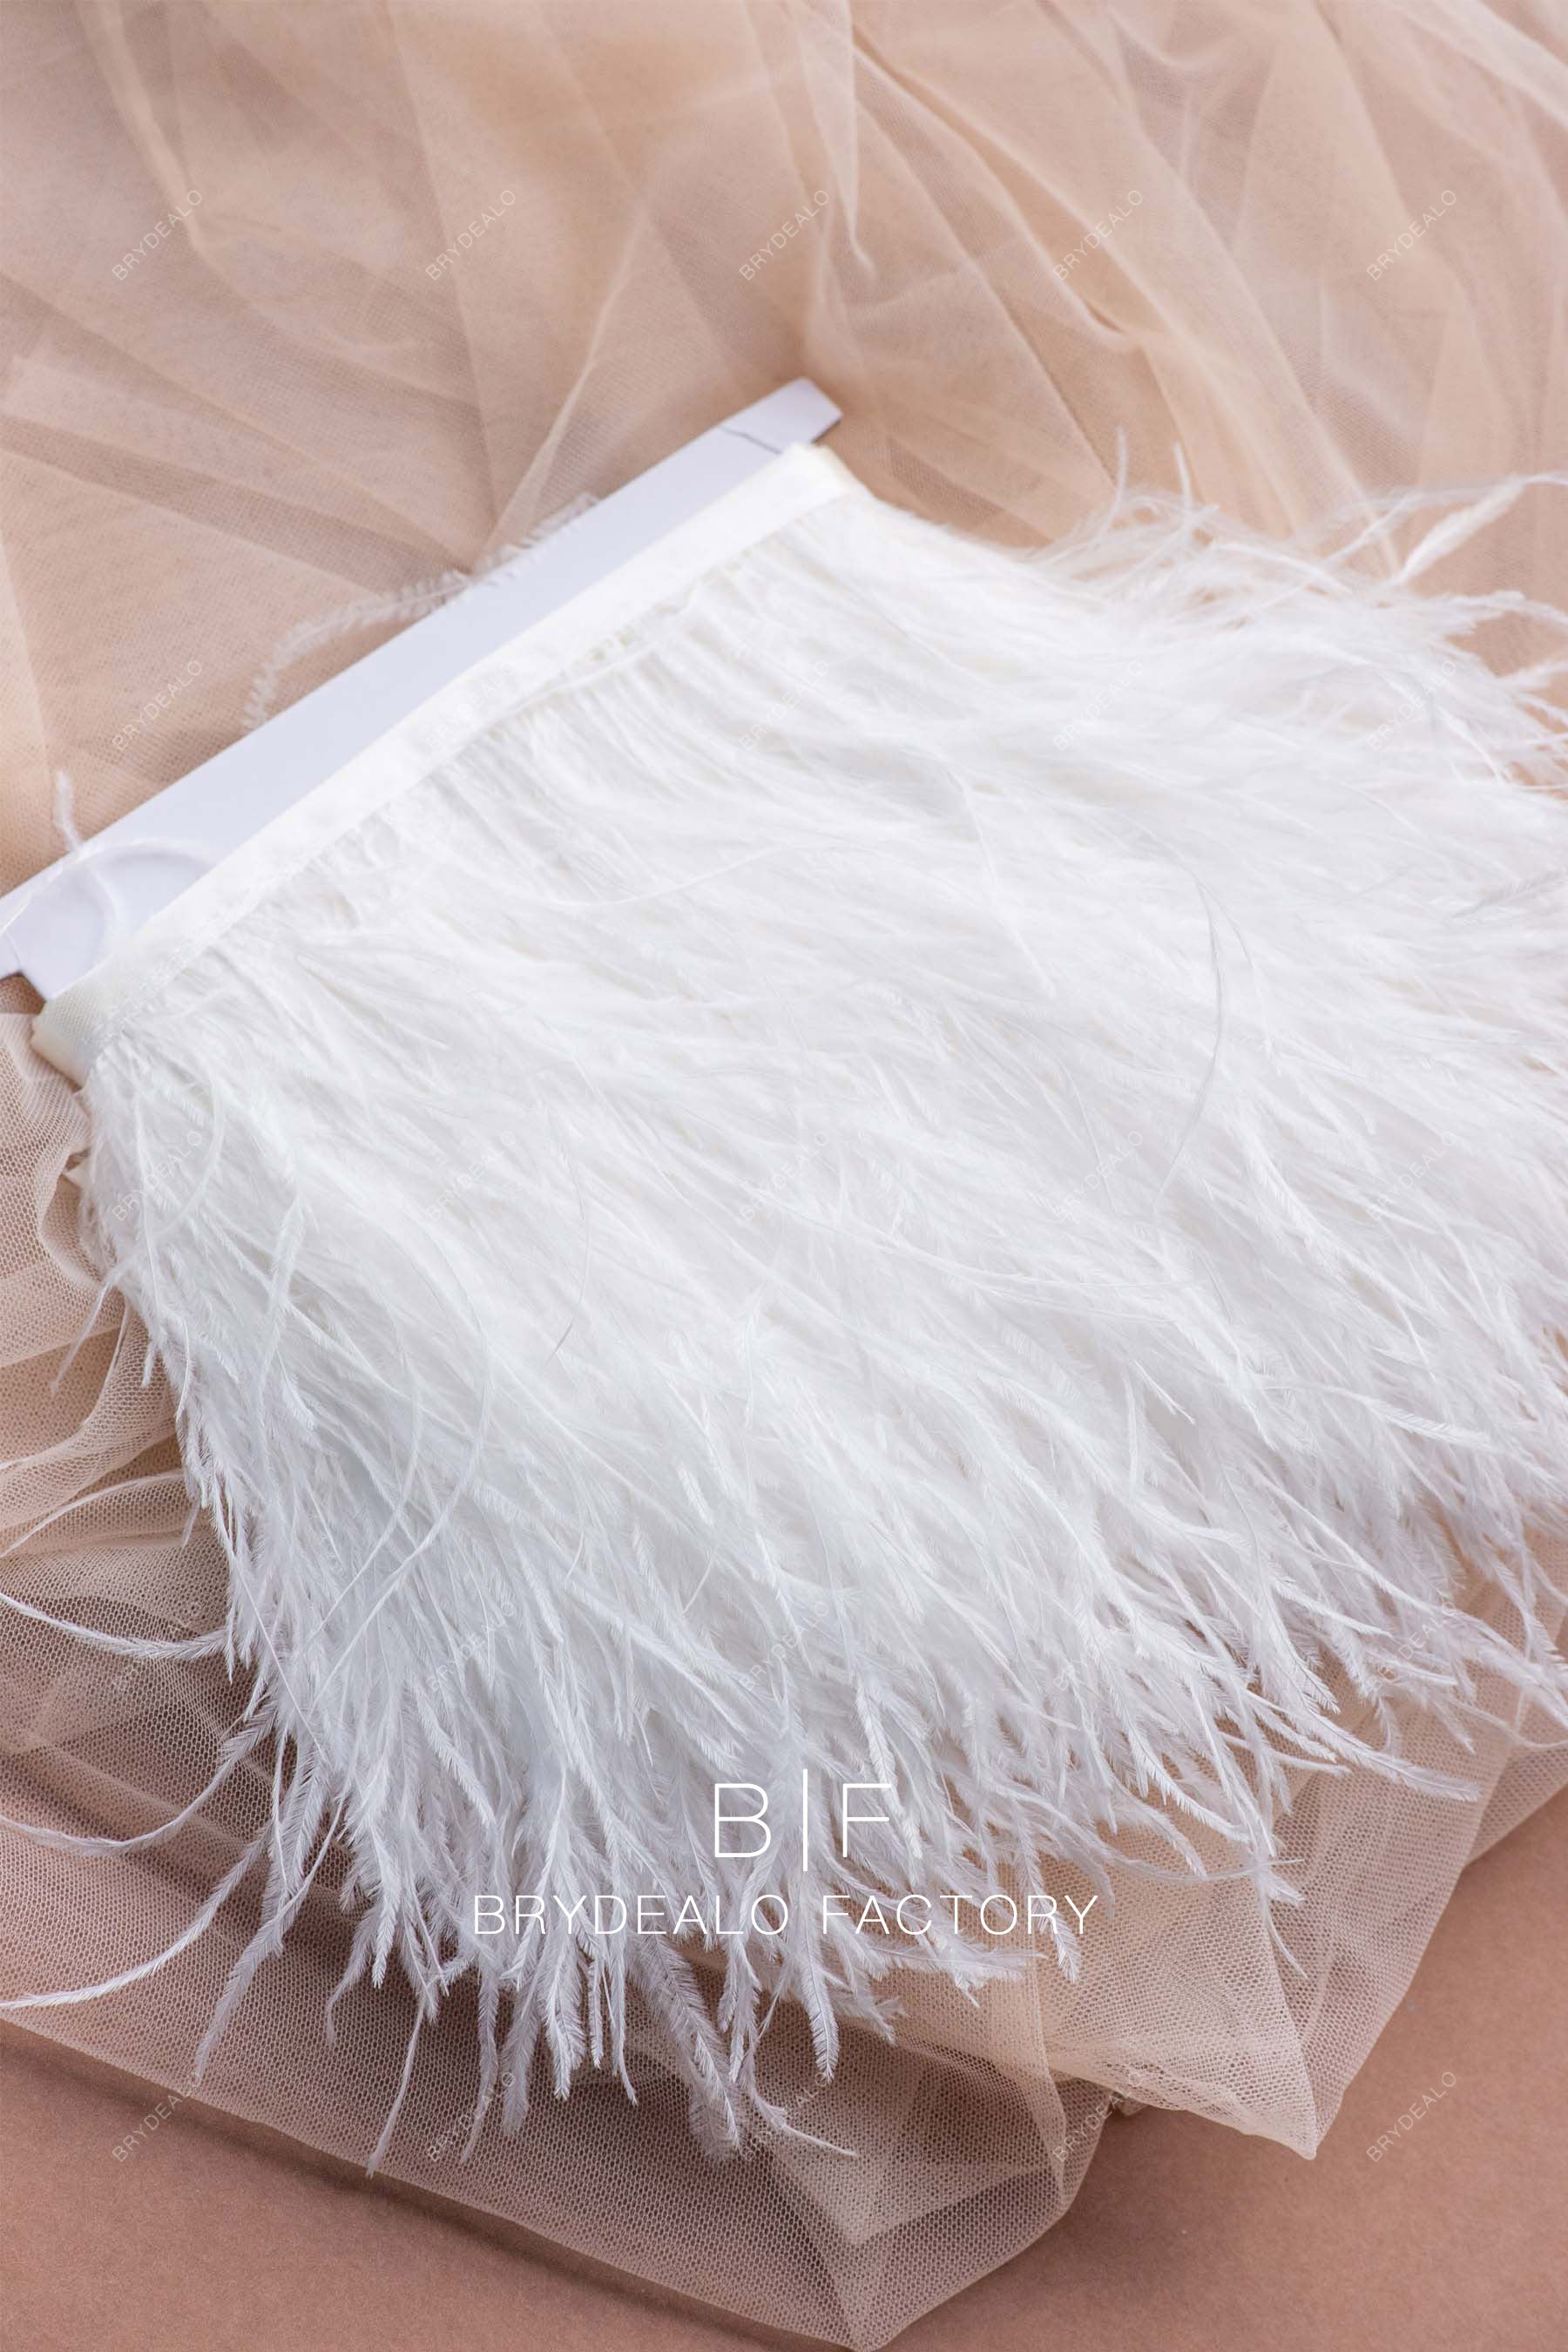 Ostrich Feather Trim: Fashion Feather Trimmings from Italy, SKU